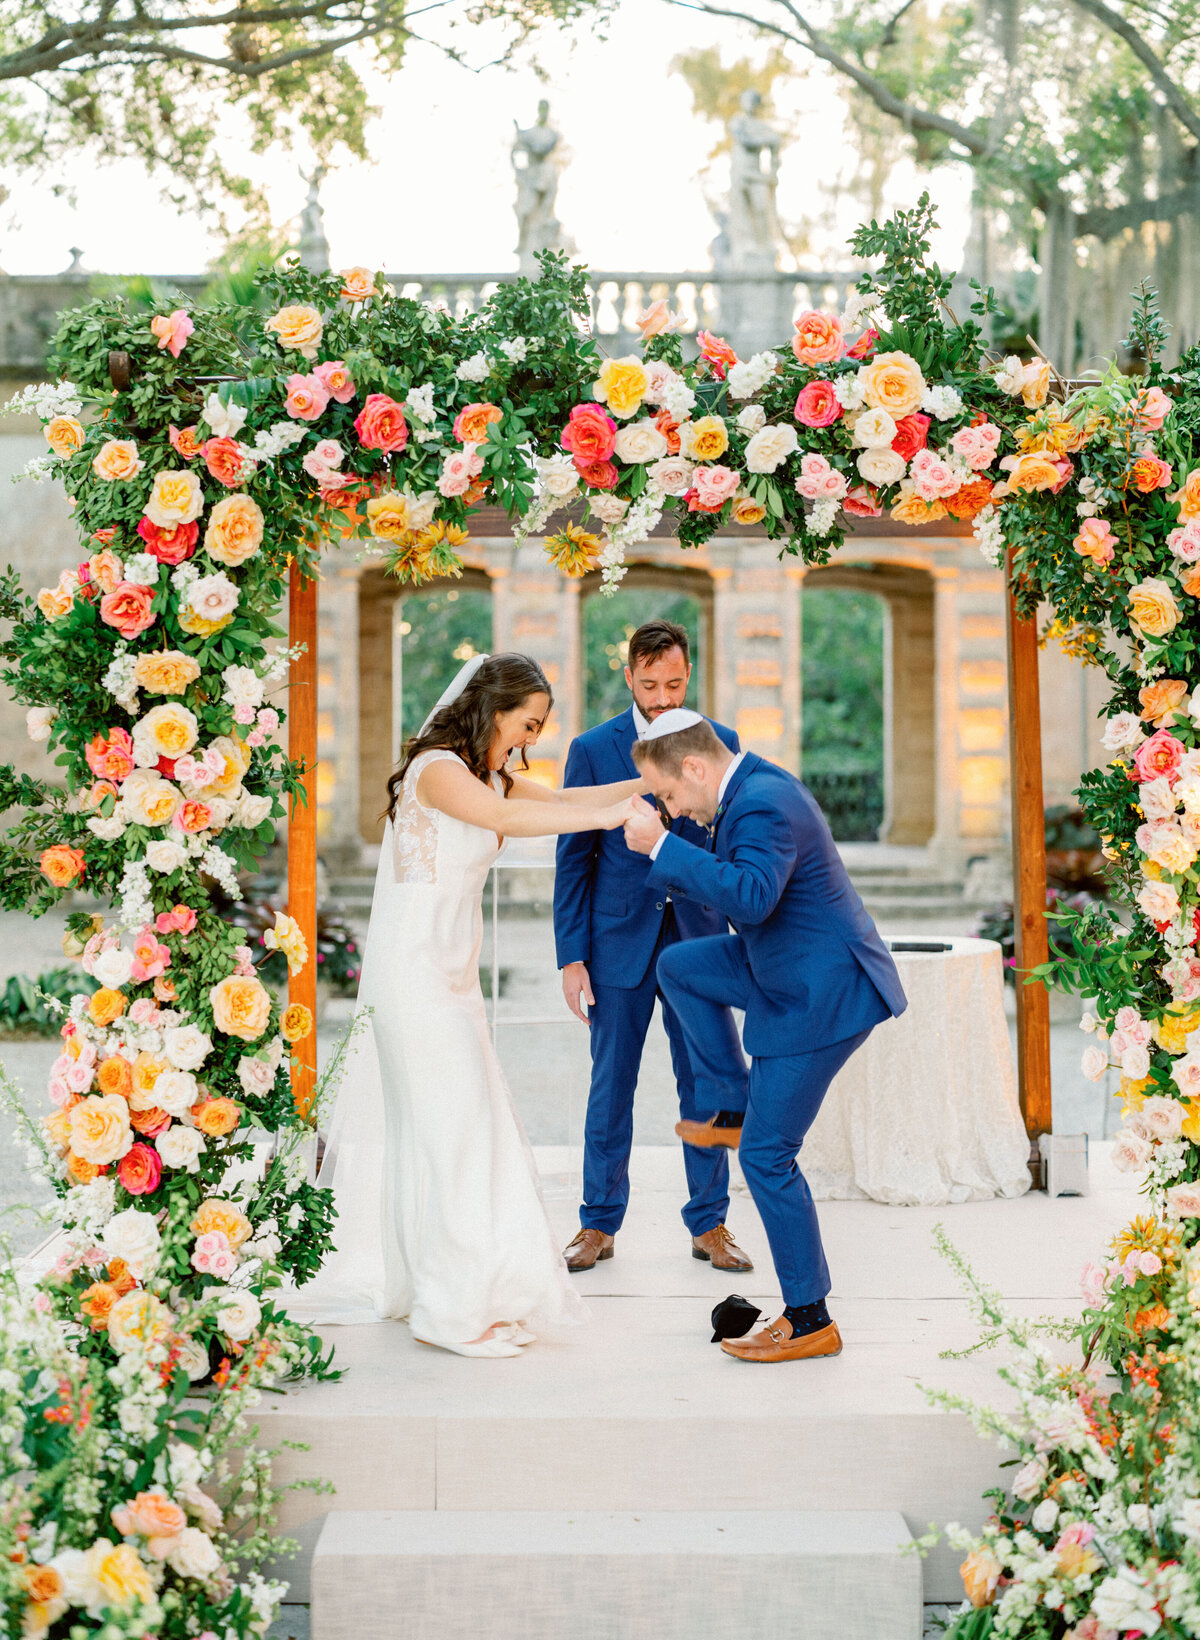 chuppah decorated in bright flowers